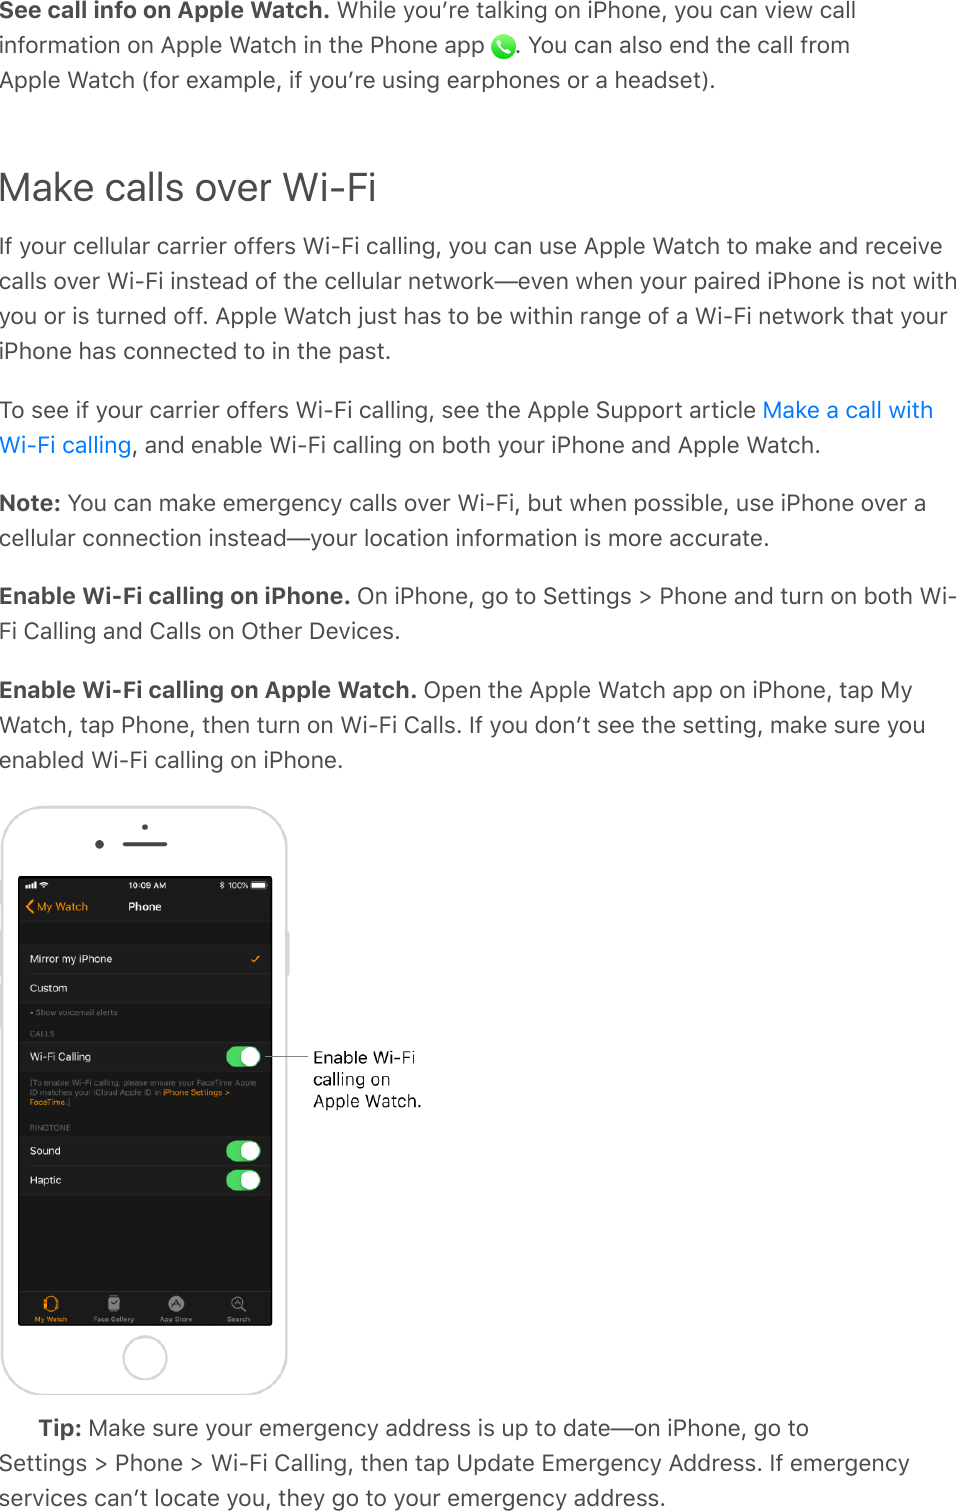 See call info on Apple Watch. D)+&quot;%&amp;4#2`*%&amp;/&apos;&quot;1+,-&amp;#,&amp;+K)#,%I&amp;4#2&amp;(&apos;,&amp;:+%0&amp;(&apos;&quot;&quot;+,=#*;&apos;/+#,&amp;#,&amp;9CC&quot;%&amp;D&apos;/()&amp;+,&amp;/)%&amp;K)#,%&amp;&apos;CC&amp; ?&amp;7#2&amp;(&apos;,&amp;&apos;&quot;$#&amp;%,8&amp;/)%&amp;(&apos;&quot;&quot;&amp;=*#;9CC&quot;%&amp;D&apos;/()&amp;Q=#*&amp;%a&apos;;C&quot;%I&amp;+=&amp;4#2`*%&amp;2$+,-&amp;%&apos;*C)#,%$&amp;#*&amp;&apos;&amp;)%&apos;8$%/S?Make calls over Wi-Fi]=&amp;4#2*&amp;(%&quot;&quot;2&quot;&apos;*&amp;(&apos;**+%*&amp;#==%*$&amp;D+AH+&amp;(&apos;&quot;&quot;+,-I&amp;4#2&amp;(&apos;,&amp;2$%&amp;9CC&quot;%&amp;D&apos;/()&amp;/#&amp;;&apos;1%&amp;&apos;,8&amp;*%(%+:%(&apos;&quot;&quot;$&amp;#:%*&amp;D+AH+&amp;+,$/%&apos;8&amp;#=&amp;/)%&amp;(%&quot;&quot;2&quot;&apos;*&amp;,%/0#*1V%:%,&amp;0)%,&amp;4#2*&amp;C&apos;+*%8&amp;+K)#,%&amp;+$&amp;,#/&amp;0+/)4#2&amp;#*&amp;+$&amp;/2*,%8&amp;#==?&amp;9CC&quot;%&amp;D&apos;/()&amp;P2$/&amp;)&apos;$&amp;/#&amp;&gt;%&amp;0+/)+,&amp;*&apos;,-%&amp;#=&amp;&apos;&amp;D+AH+&amp;,%/0#*1&amp;/)&apos;/&amp;4#2*+K)#,%&amp;)&apos;$&amp;(#,,%(/%8&amp;/#&amp;+,&amp;/)%&amp;C&apos;$/?@#&amp;$%%&amp;+=&amp;4#2*&amp;(&apos;**+%*&amp;#==%*$&amp;D+AH+&amp;(&apos;&quot;&quot;+,-I&amp;$%%&amp;/)%&amp;9CC&quot;%&amp;.2CC#*/&amp;&apos;*/+(&quot;%&amp;I&amp;&apos;,8&amp;%,&apos;&gt;&quot;%&amp;D+AH+&amp;(&apos;&quot;&quot;+,-&amp;#,&amp;&gt;#/)&amp;4#2*&amp;+K)#,%&amp;&apos;,8&amp;9CC&quot;%&amp;D&apos;/()?Note: 7#2&amp;(&apos;,&amp;;&apos;1%&amp;%;%*-%,(4&amp;(&apos;&quot;&quot;$&amp;#:%*&amp;D+AH+I&amp;&gt;2/&amp;0)%,&amp;C#$$+&gt;&quot;%I&amp;2$%&amp;+K)#,%&amp;#:%*&amp;&apos;(%&quot;&quot;2&quot;&apos;*&amp;(#,,%(/+#,&amp;+,$/%&apos;8V4#2*&amp;&quot;#(&apos;/+#,&amp;+,=#*;&apos;/+#,&amp;+$&amp;;#*%&amp;&apos;((2*&apos;/%?Enable Wi-Fi calling on iPhone. M,&amp;+K)#,%I&amp;-#&amp;/#&amp;.%//+,-$&amp;d&amp;K)#,%&amp;&apos;,8&amp;/2*,&amp;#,&amp;&gt;#/)&amp;D+AH+&amp;!&apos;&quot;&quot;+,-&amp;&apos;,8&amp;!&apos;&quot;&quot;$&amp;#,&amp;M/)%*&amp;L%:+(%$?Enable Wi-Fi calling on Apple Watch. MC%,&amp;/)%&amp;9CC&quot;%&amp;D&apos;/()&amp;&apos;CC&amp;#,&amp;+K)#,%I&amp;/&apos;C&amp;J4D&apos;/()I&amp;/&apos;C&amp;K)#,%I&amp;/)%,&amp;/2*,&amp;#,&amp;D+AH+&amp;!&apos;&quot;&quot;$?&amp;]=&amp;4#2&amp;8#,`/&amp;$%%&amp;/)%&amp;$%//+,-I&amp;;&apos;1%&amp;$2*%&amp;4#2%,&apos;&gt;&quot;%8&amp;D+AH+&amp;(&apos;&quot;&quot;+,-&amp;#,&amp;+K)#,%?Tip: J&apos;1%&amp;$2*%&amp;4#2*&amp;%;%*-%,(4&amp;&apos;88*%$$&amp;+$&amp;2C&amp;/#&amp;8&apos;/%V#,&amp;+K)#,%I&amp;-#&amp;/#.%//+,-$&amp;d&amp;K)#,%&amp;d&amp;D+AH+&amp;!&apos;&quot;&quot;+,-I&amp;/)%,&amp;/&apos;C&amp;EC8&apos;/%&amp;h;%*-%,(4&amp;988*%$$?&amp;]=&amp;%;%*-%,(4$%*:+(%$&amp;(&apos;,`/&amp;&quot;#(&apos;/%&amp;4#2I&amp;/)%4&amp;-#&amp;/#&amp;4#2*&amp;%;%*-%,(4&amp;&apos;88*%$$?J&apos;1%&amp;&apos;&amp;(&apos;&quot;&quot;&amp;0+/)D+AH+&amp;(&apos;&quot;&quot;+,-